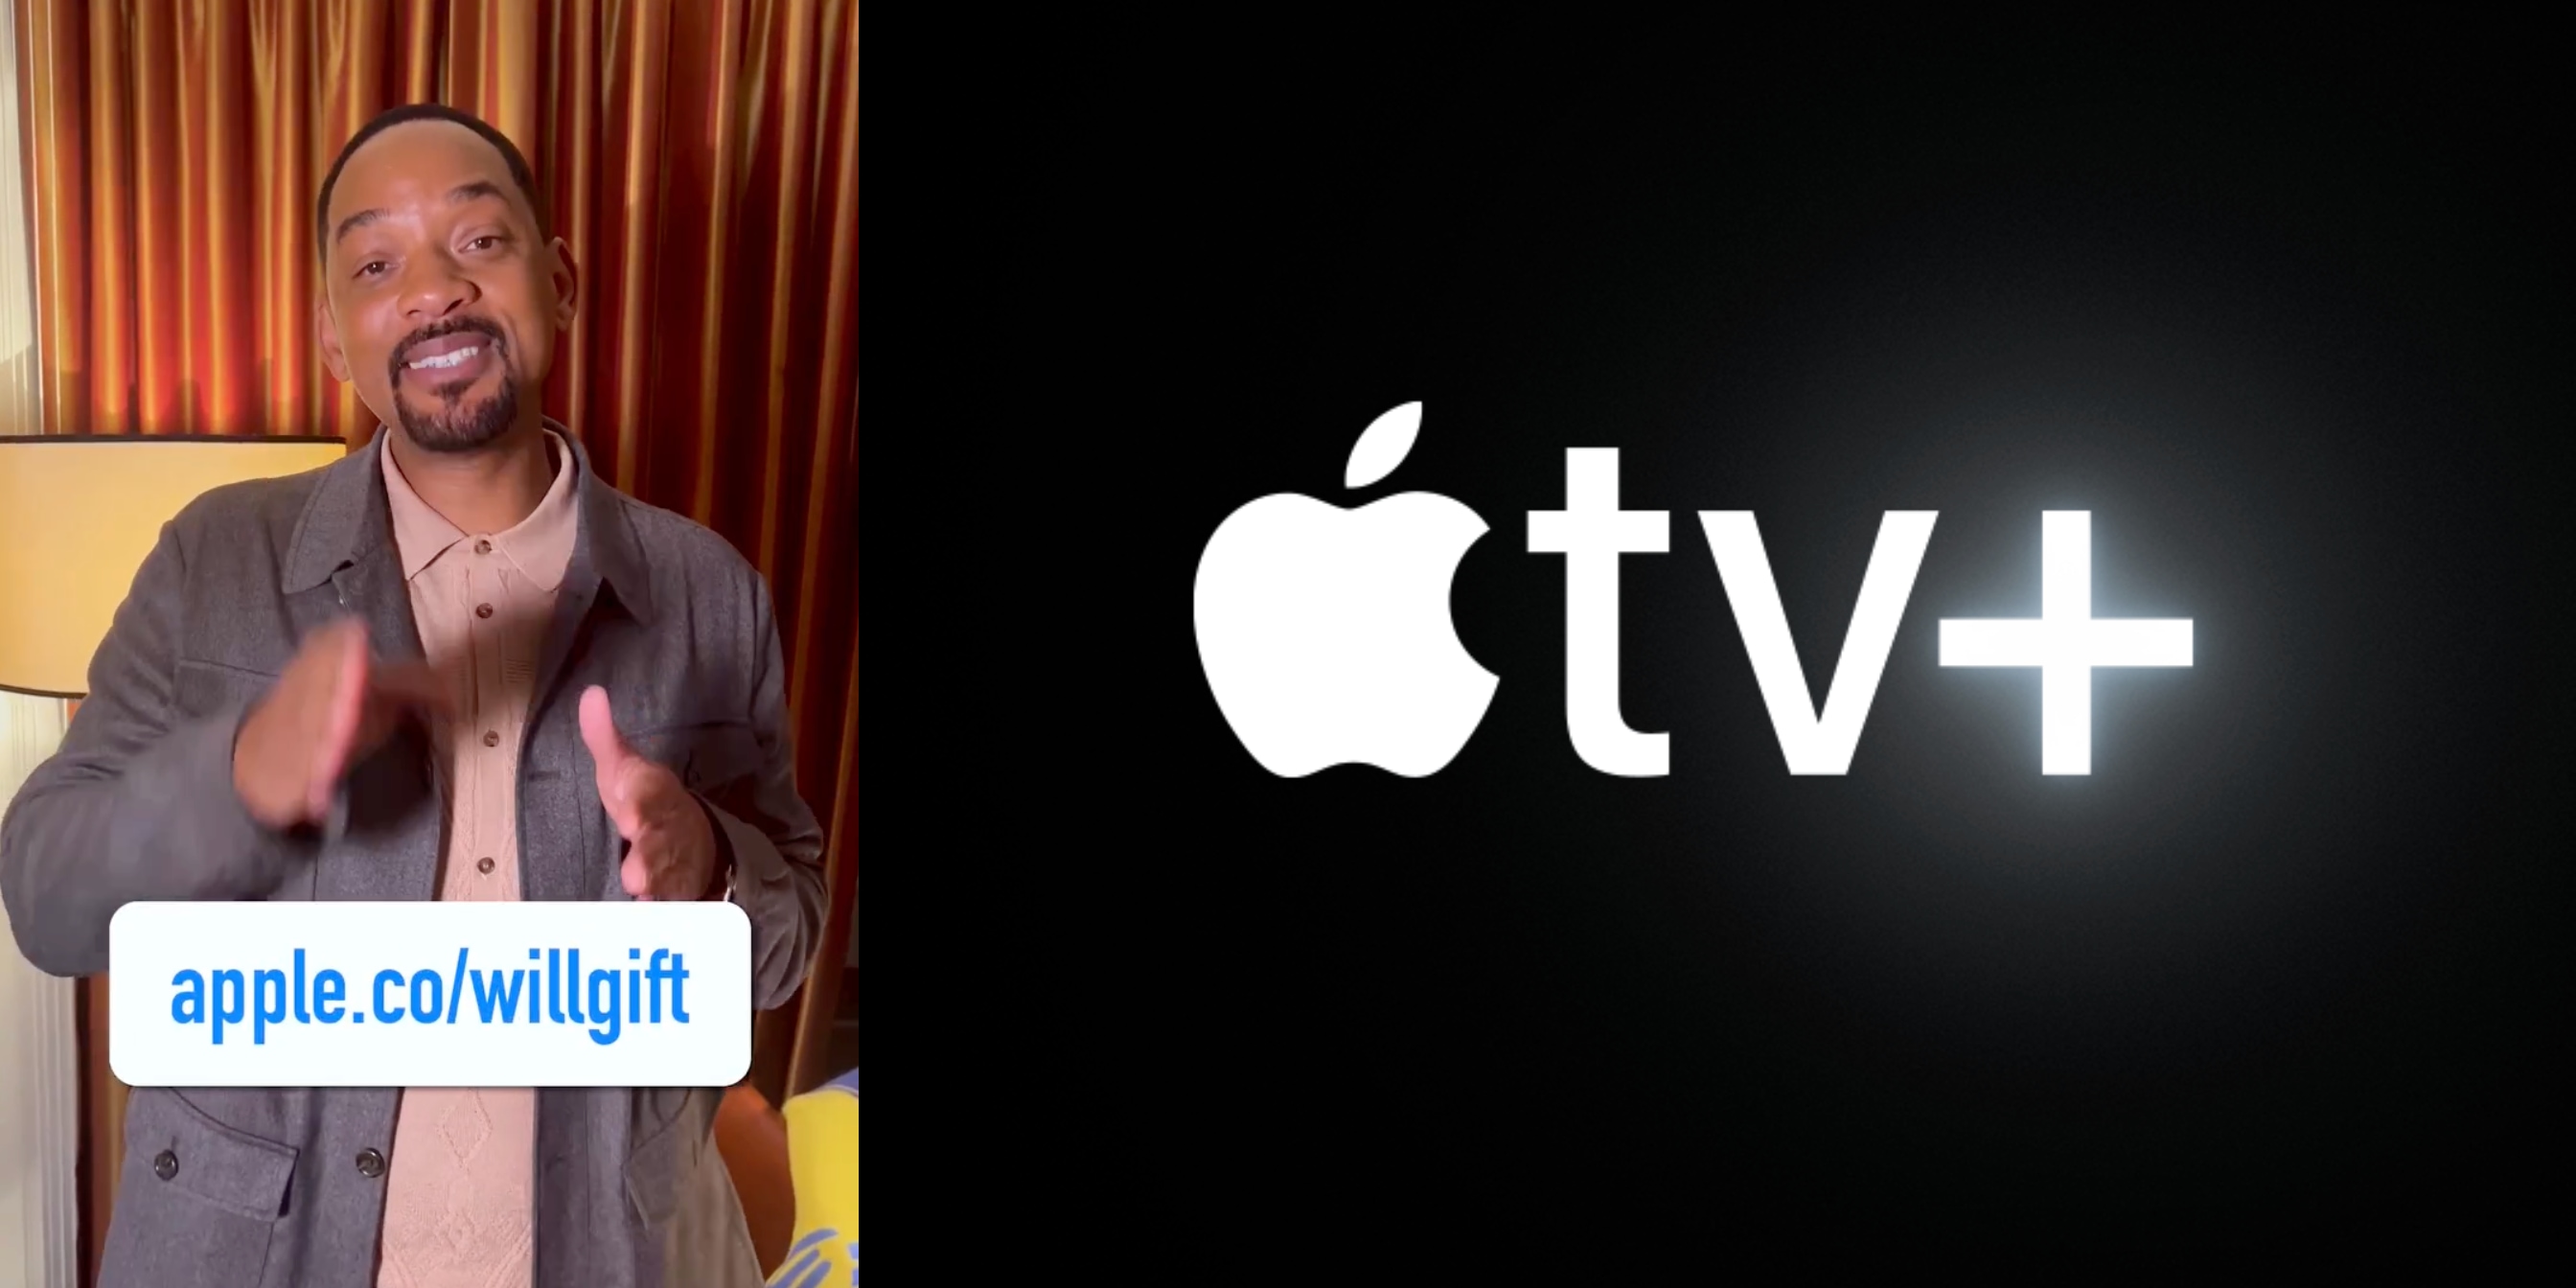 køkken henvise gambling Apple TV+ partners with Will Smith for 2-month free trial offer ahead of  'Emancipation' premiere